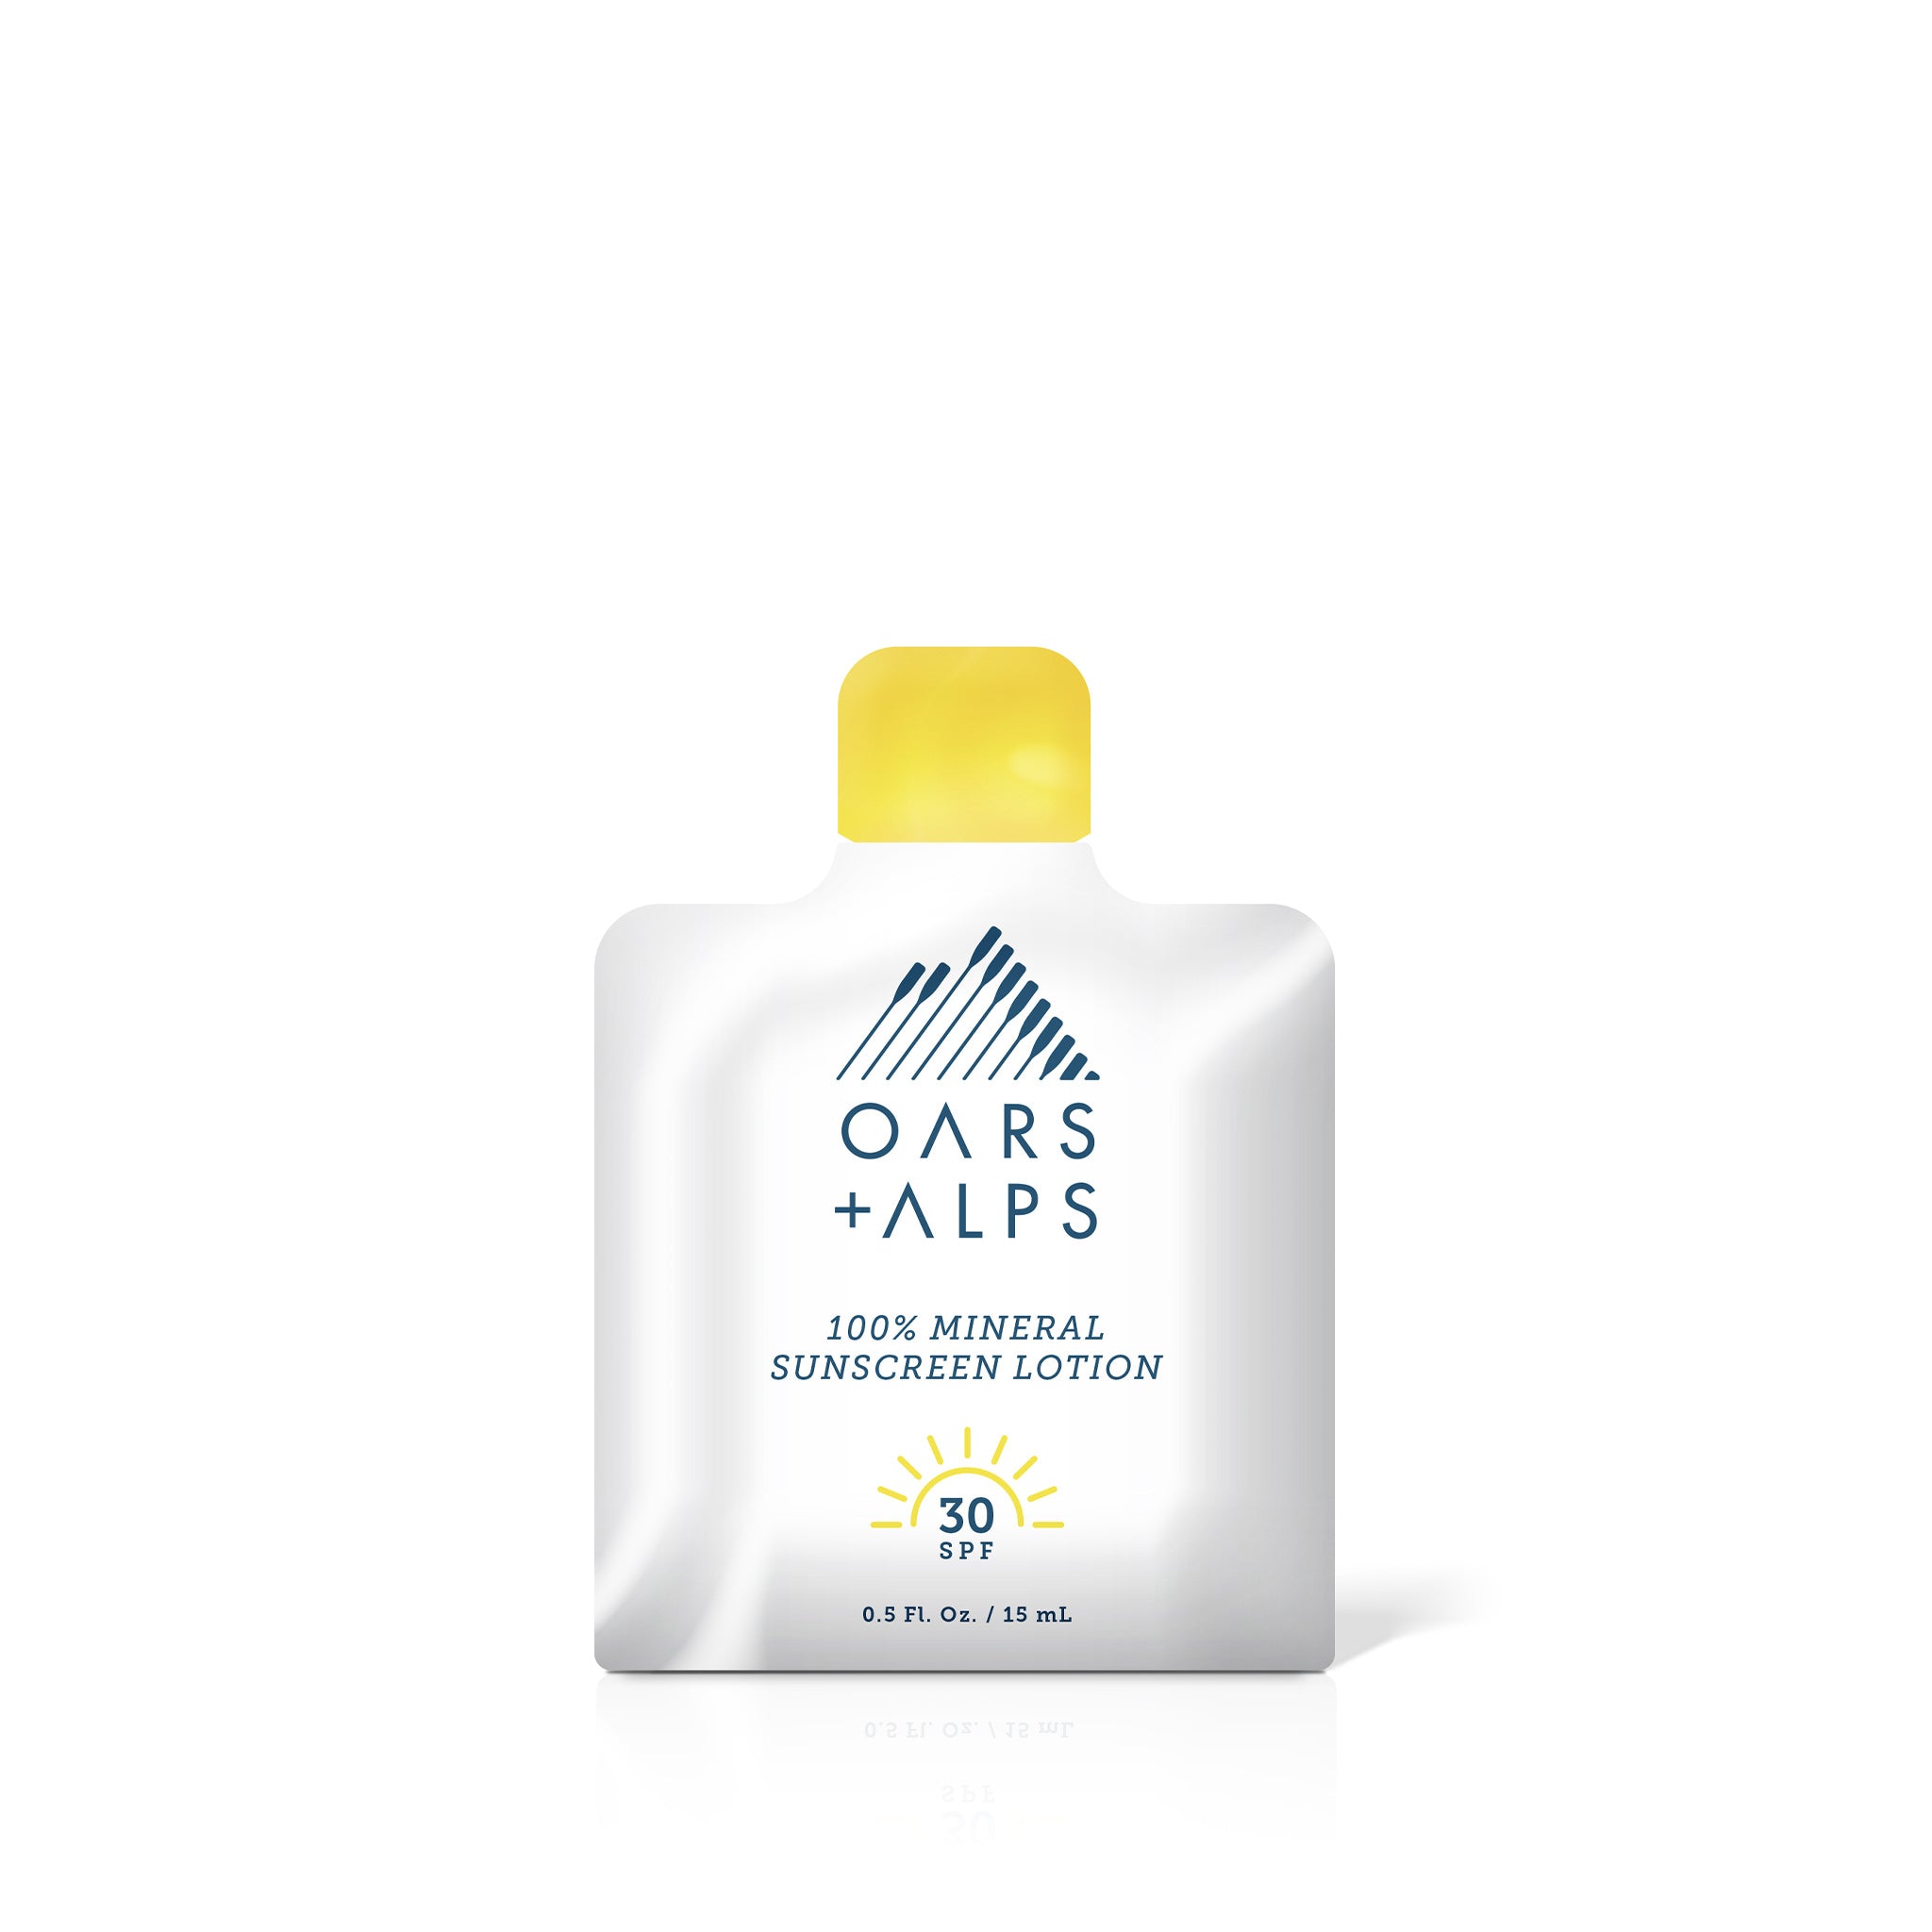 100% Mineral Sunscreen Lotion with SPF 30 Sample